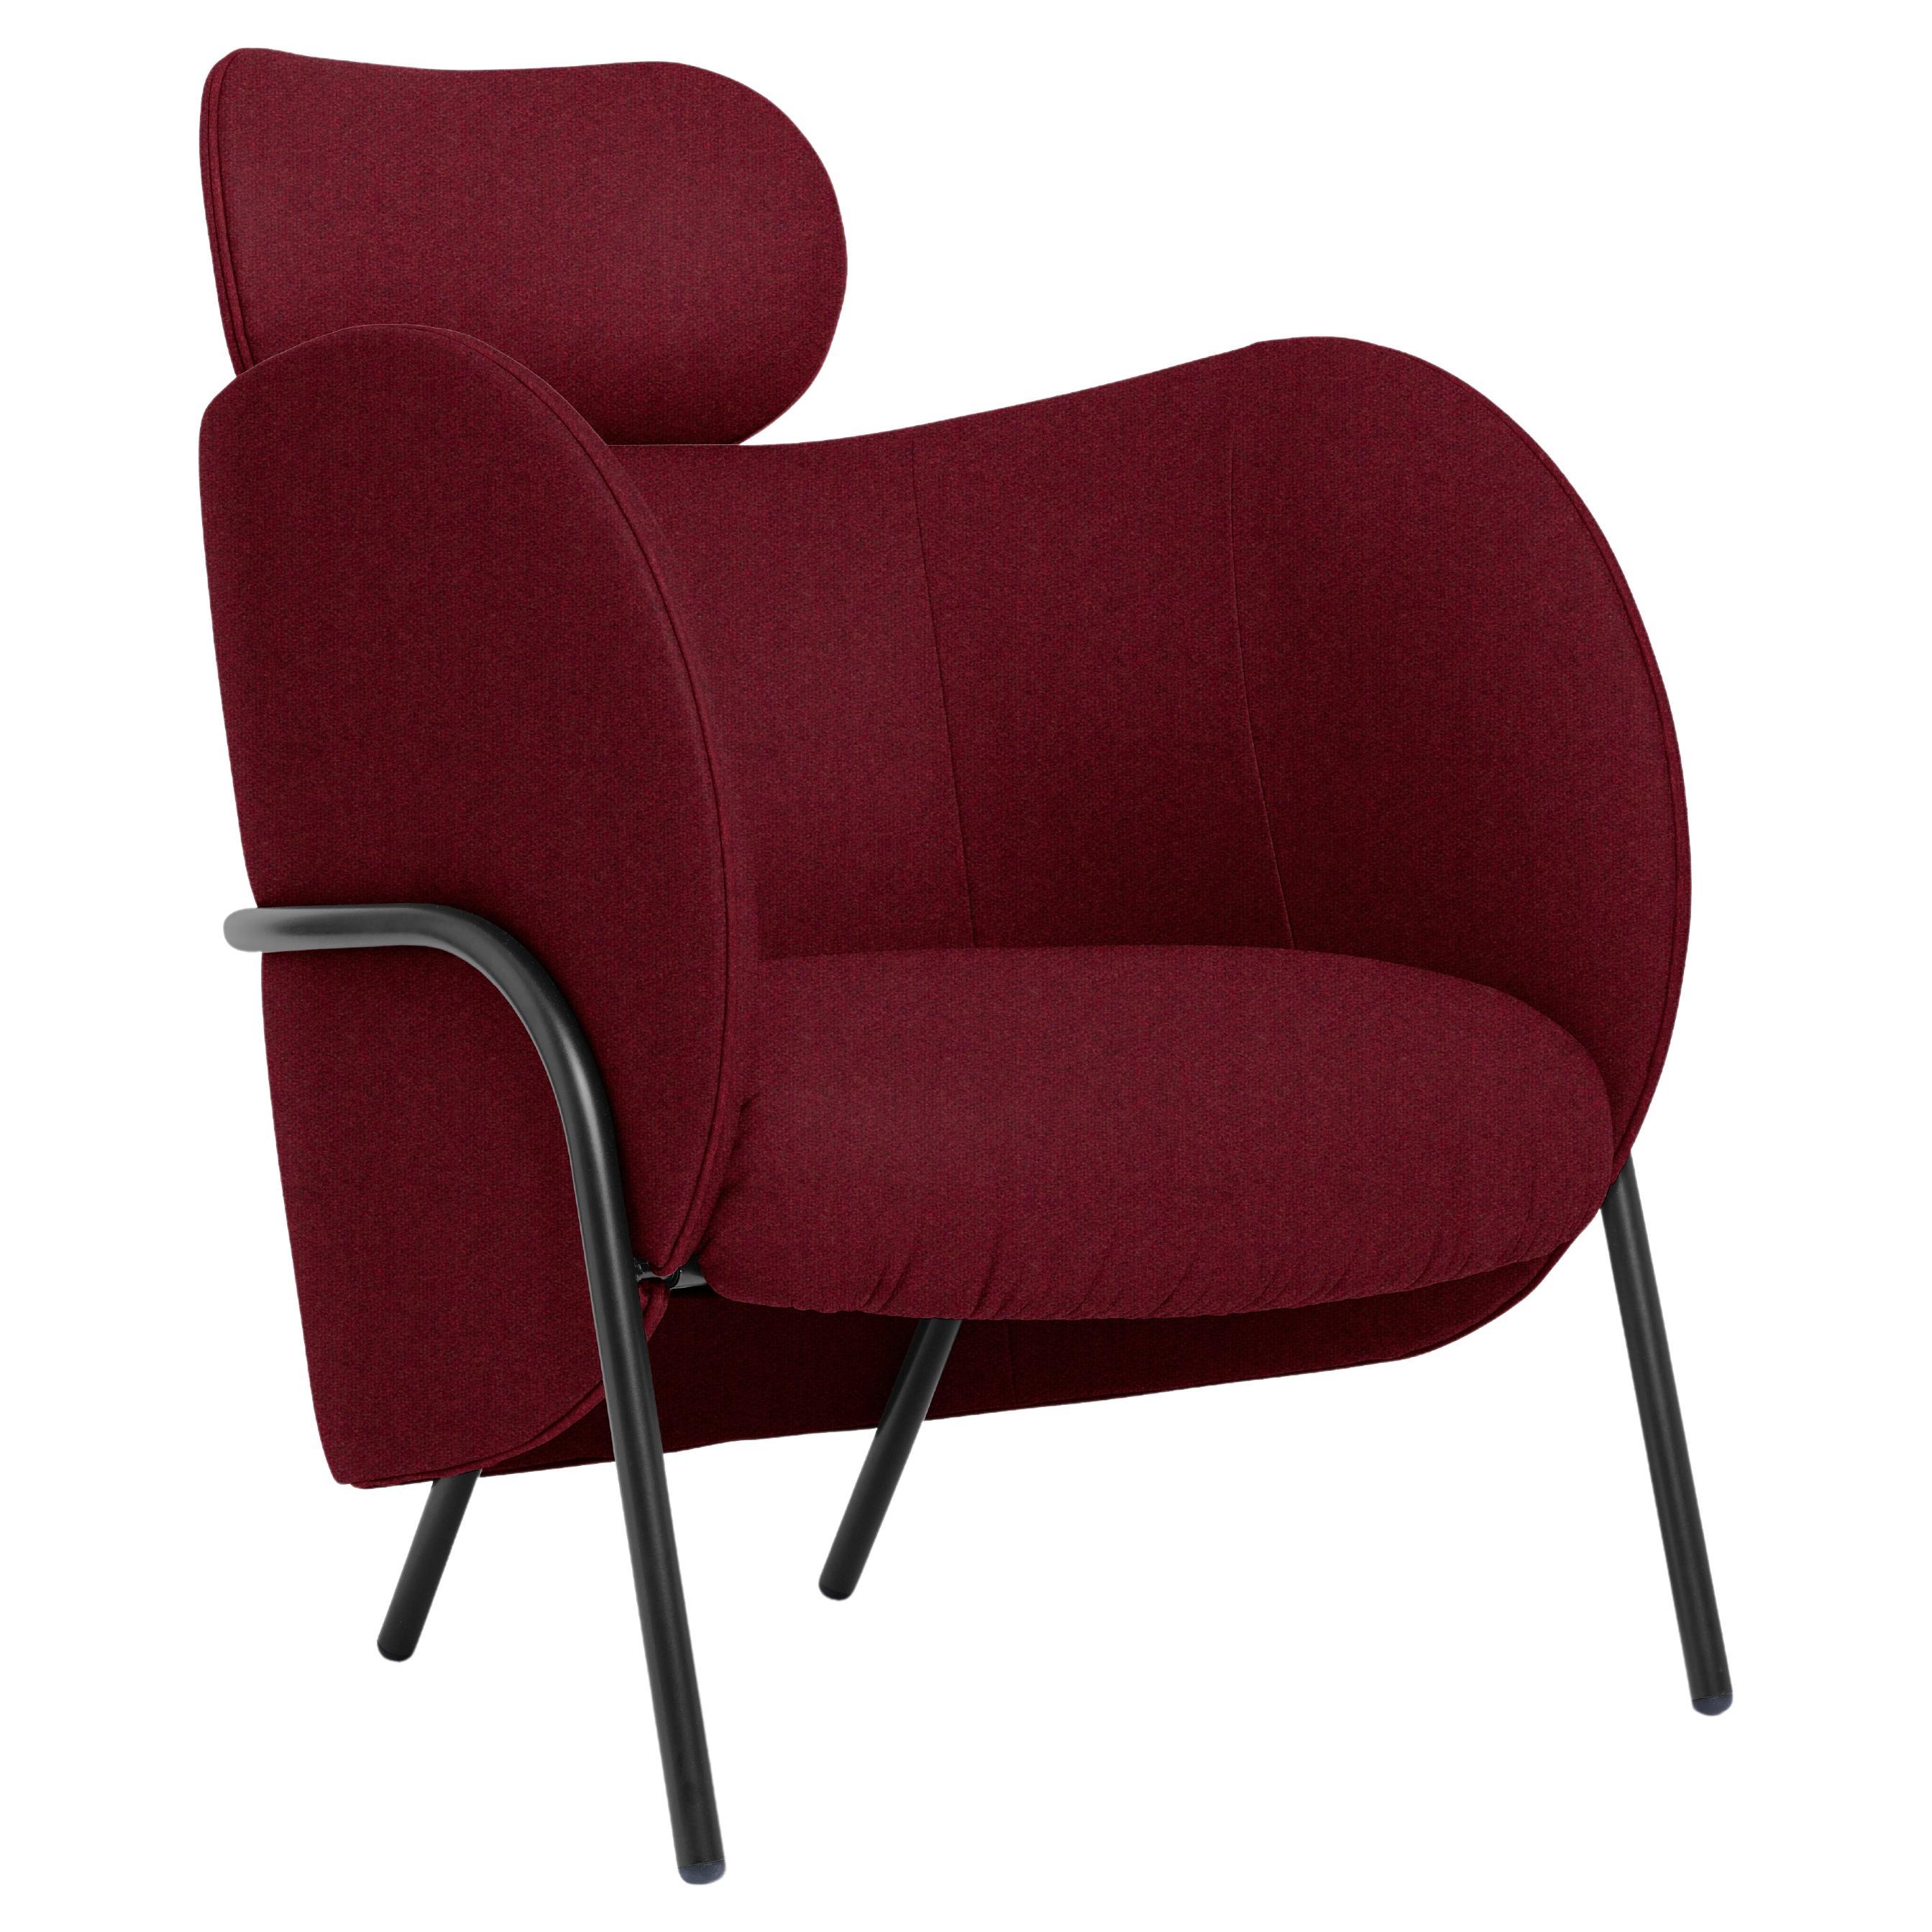 SP01 Royce Armchair with Headrest in Florence Bordeaux, Made in Italy For Sale